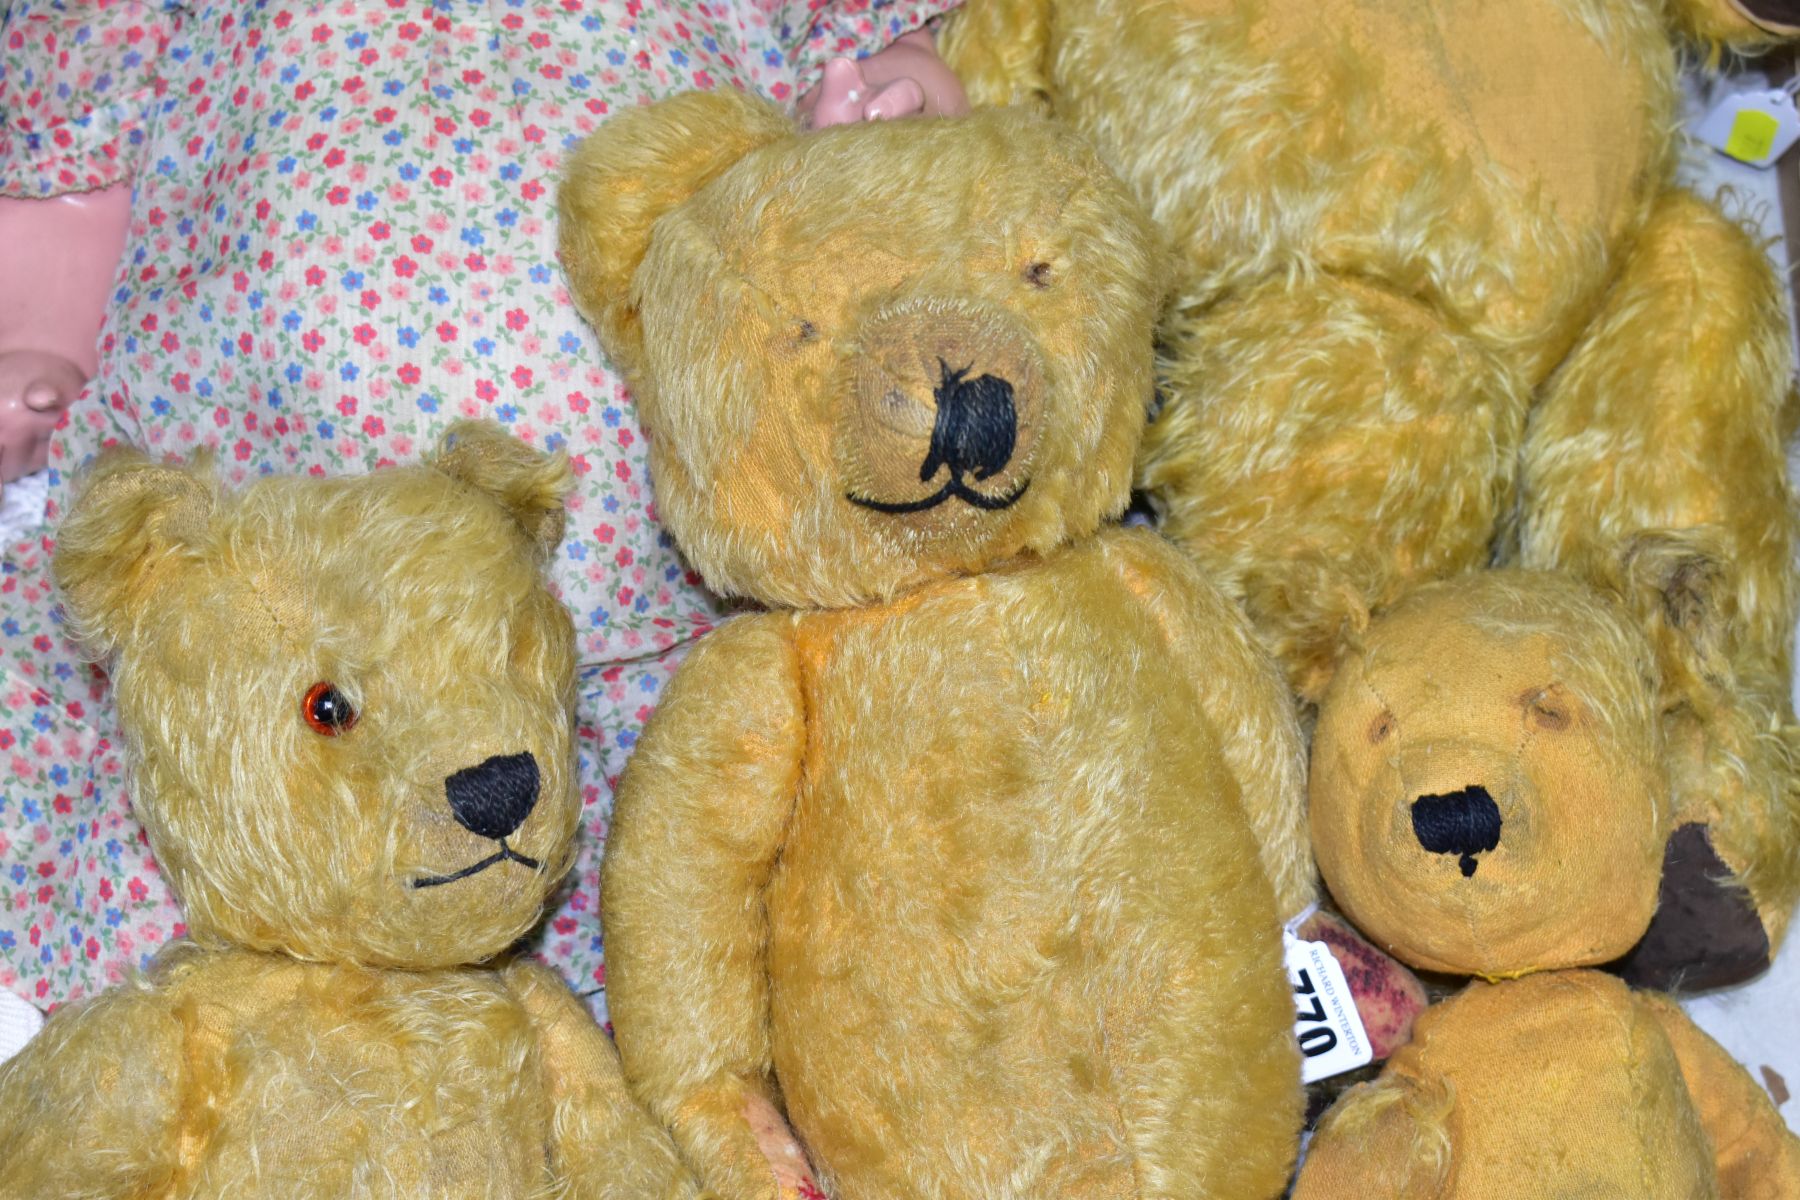 A WELL LOVED MERRYTHOUGHT GOLDEN PLUSH TEDDY BEAR, is missing both eyes, has shaved muzzle with - Image 2 of 7